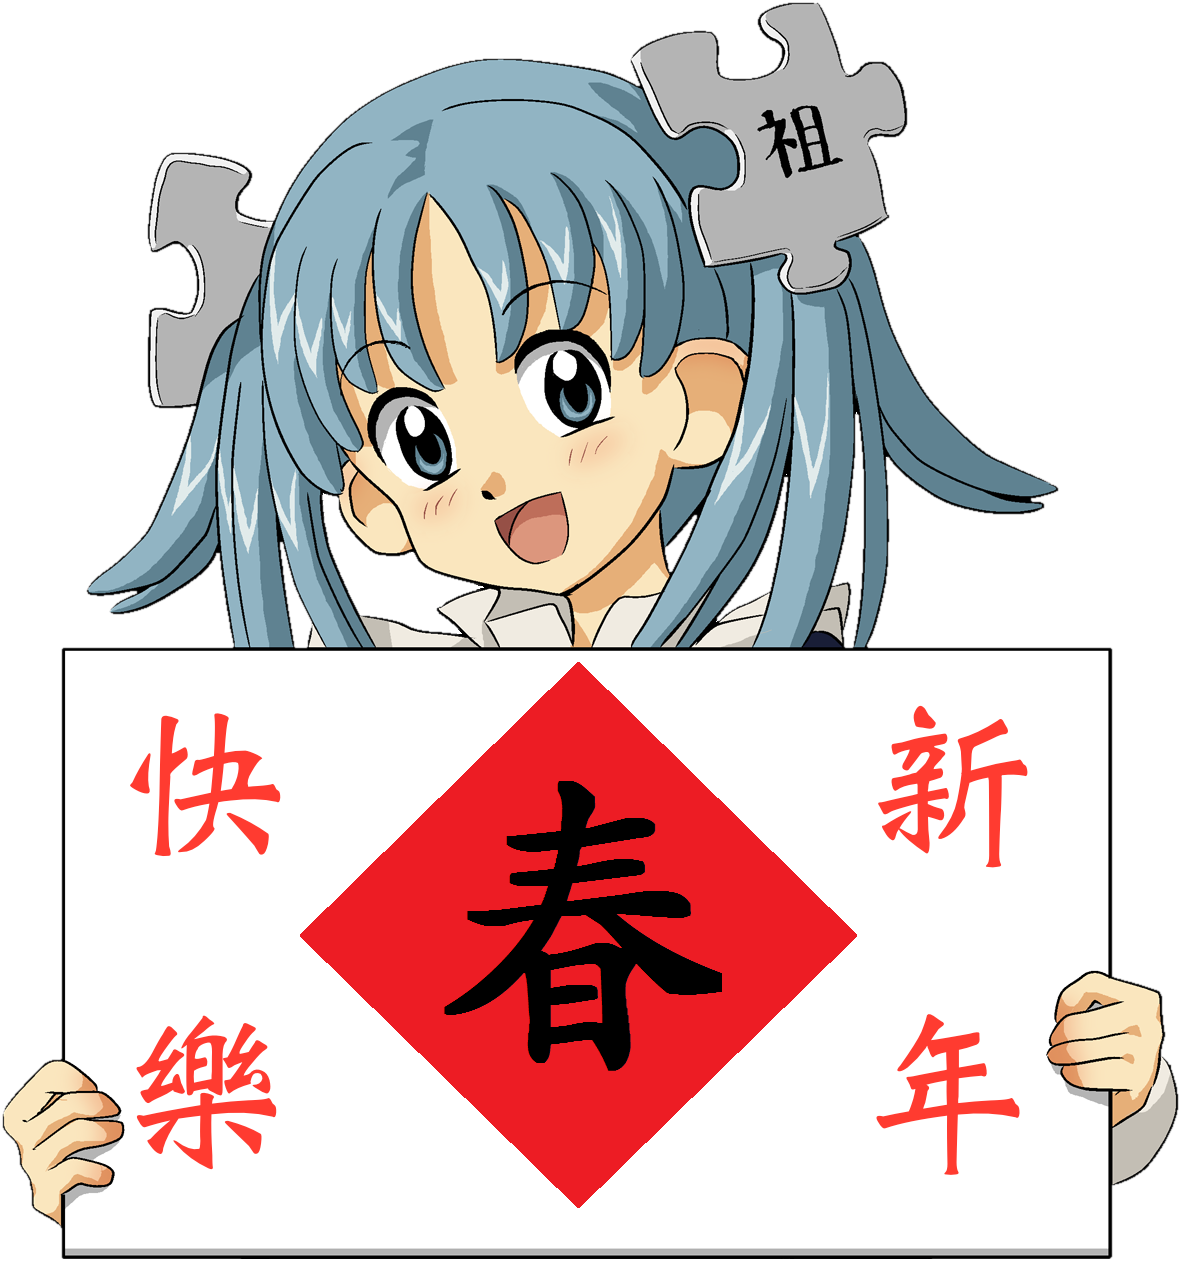 Wikipe-tan Chinese New Year - Anime Girl Holding Sign (1181x1263)